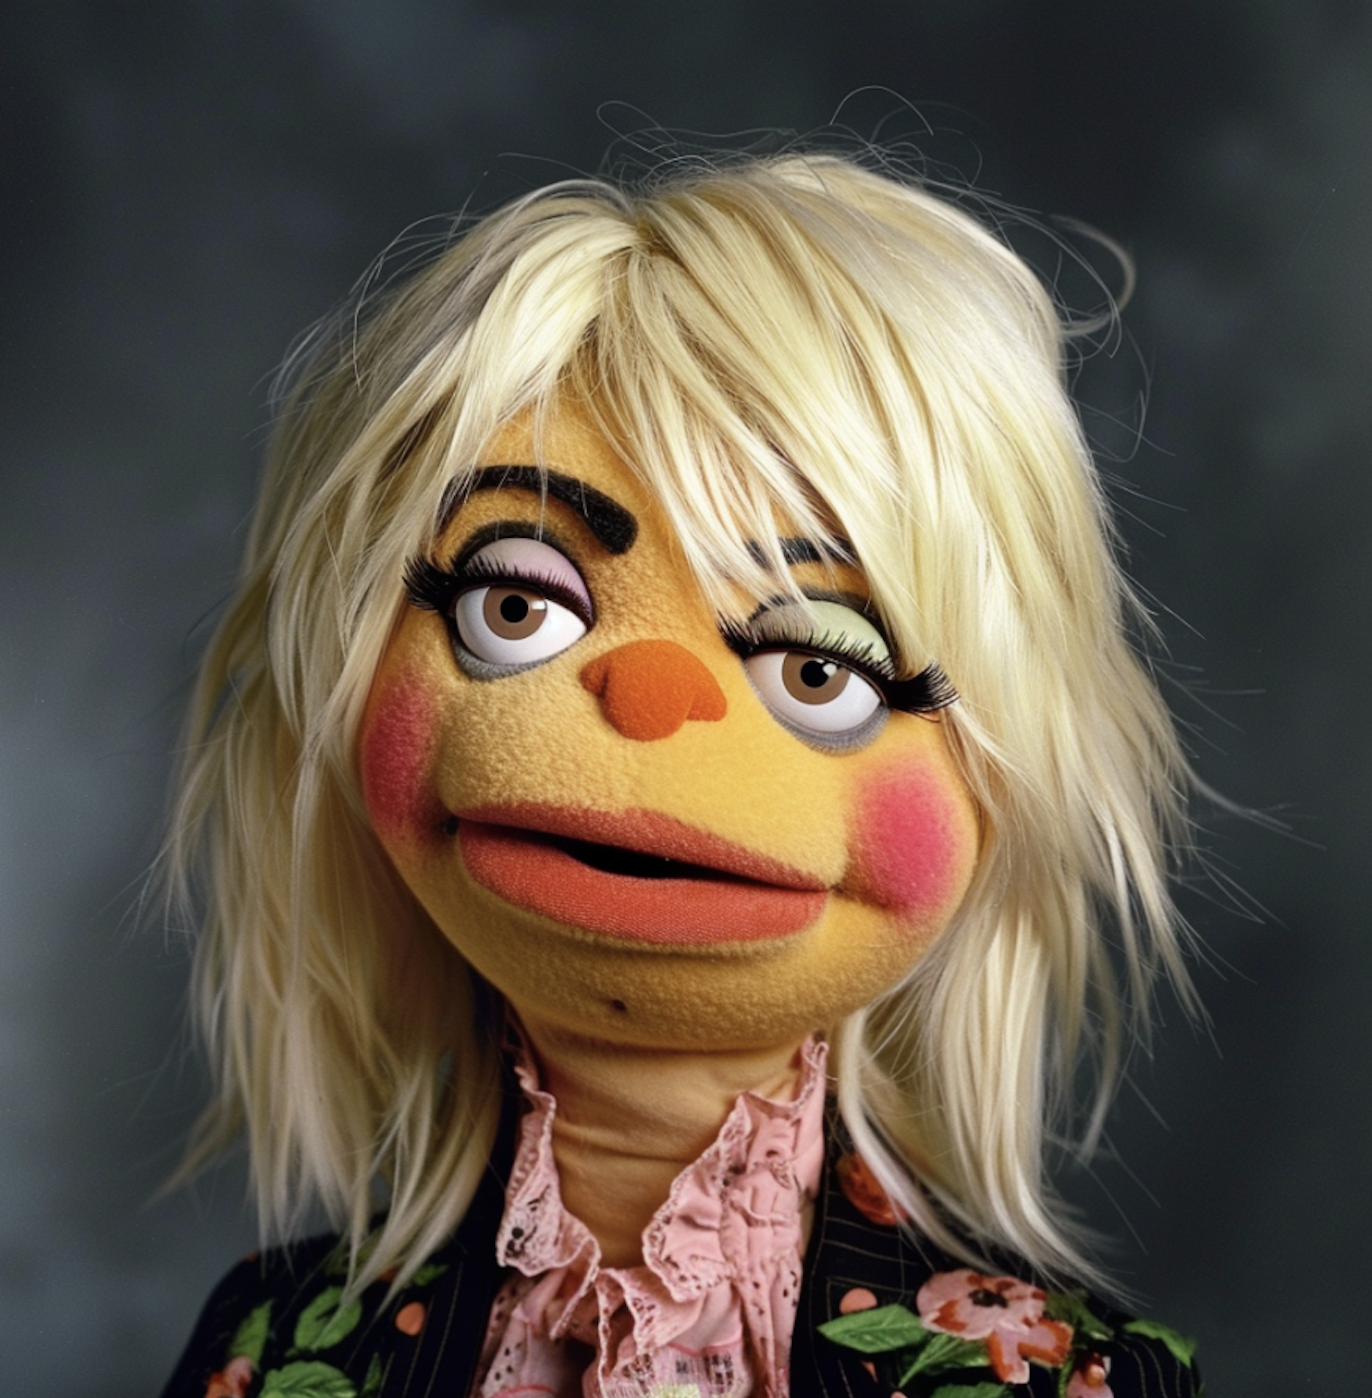 Muppet with blonde, tousled hair and bangs wearing a ruffled shirt and blazer